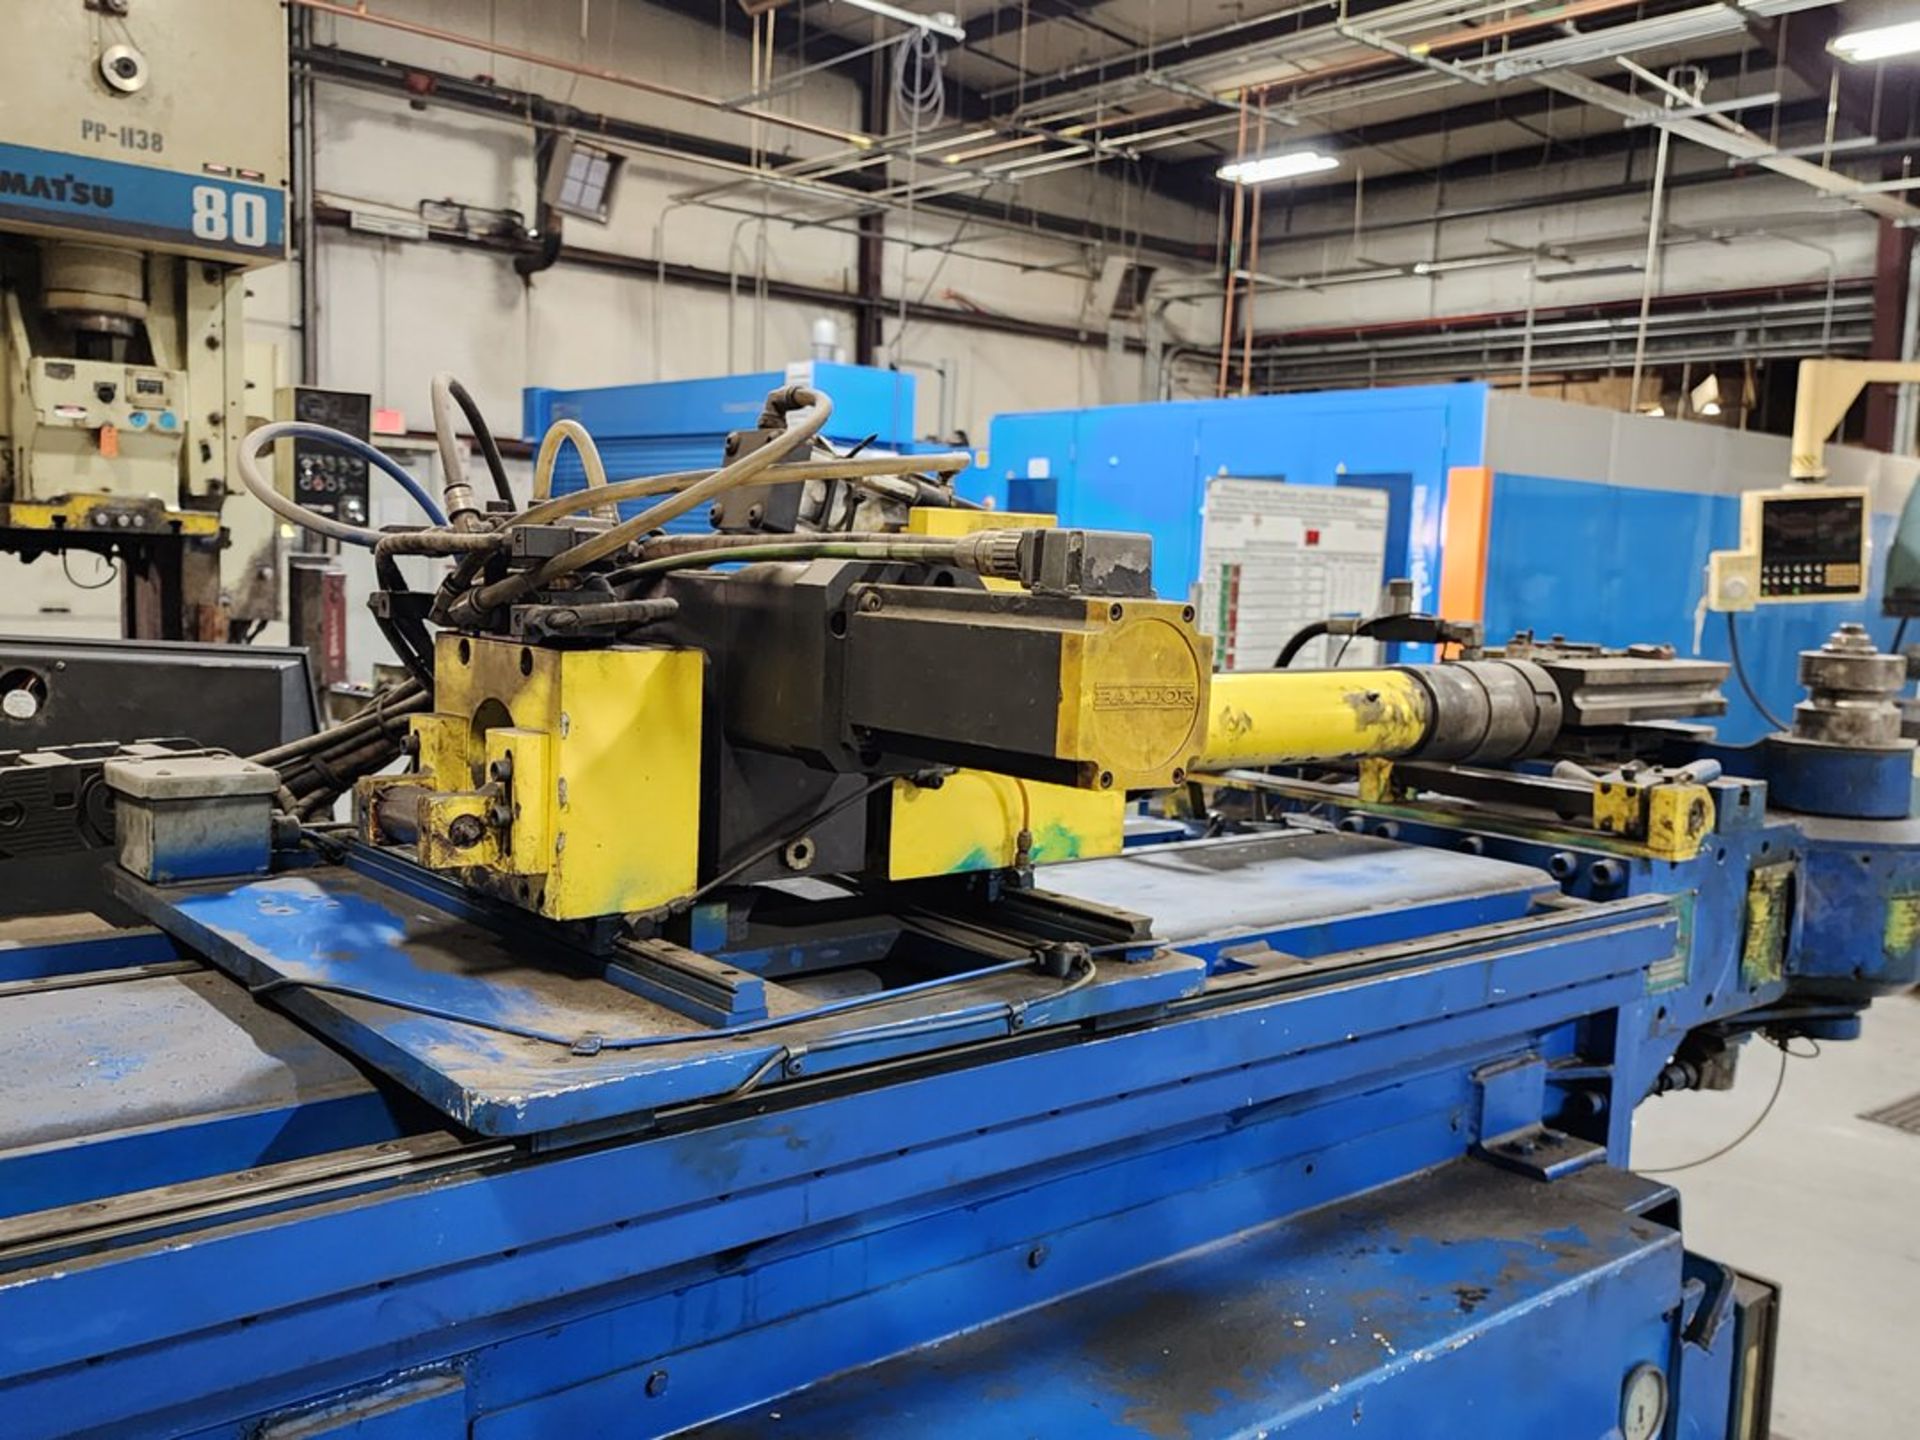 Horn CNC Hyd Tube Bender 1.5"; W/ Controller, DOM: 2006 - Image 12 of 15